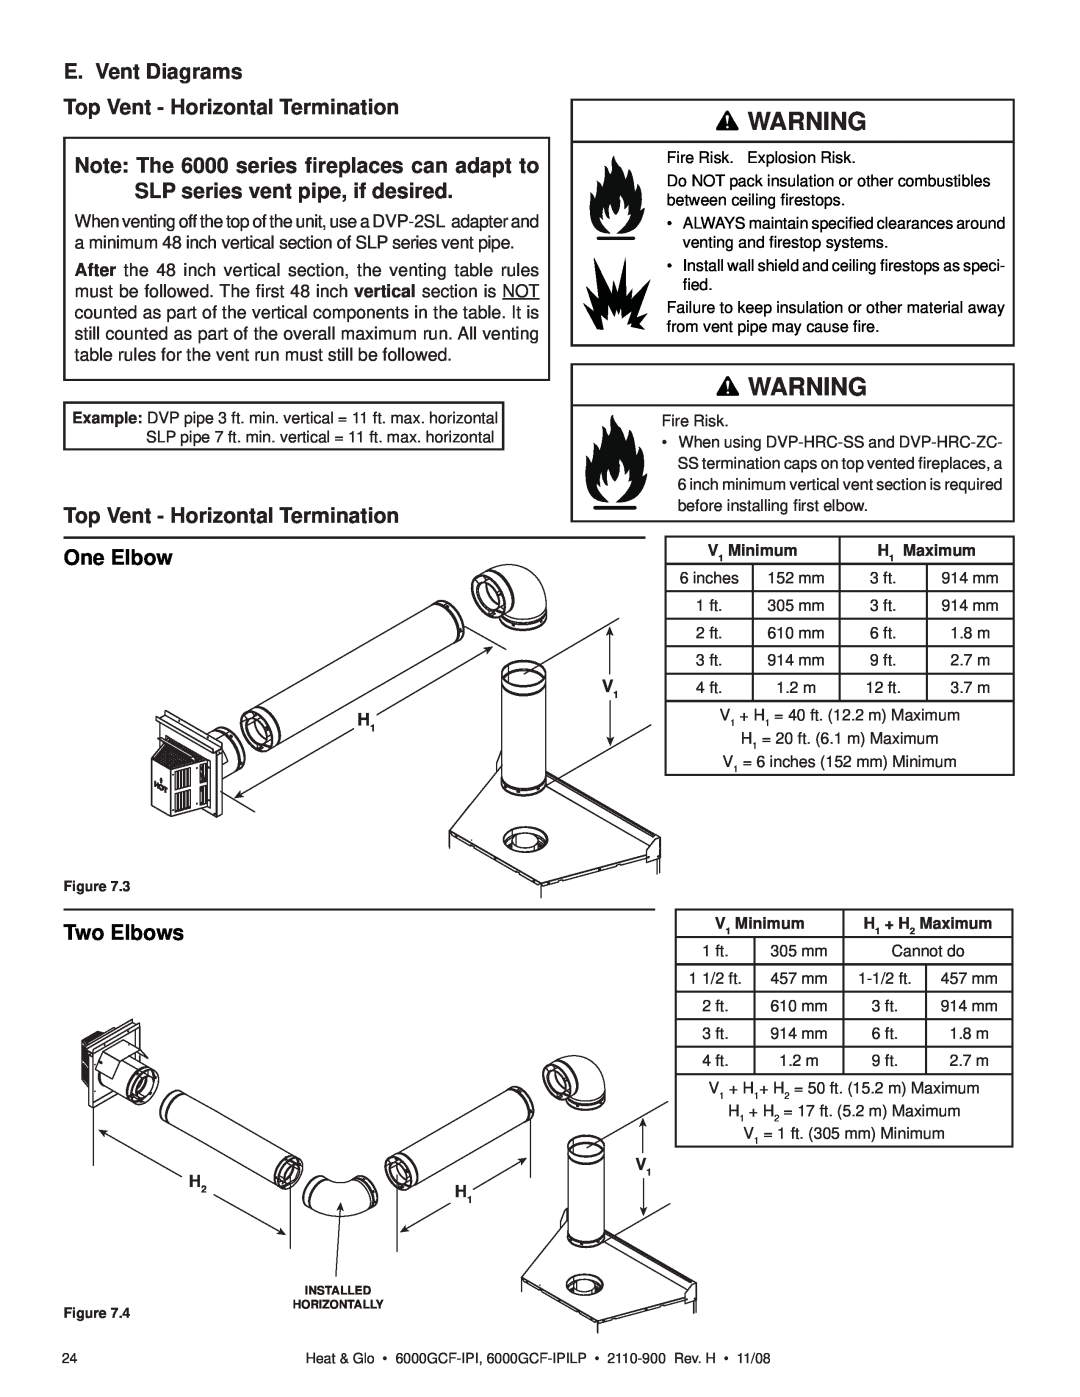 Hearth and Home Technologies 6000GCF-IPIL E. Vent Diagrams, Top Vent - Horizontal Termination, One Elbow, Two Elbows, 3 ft 